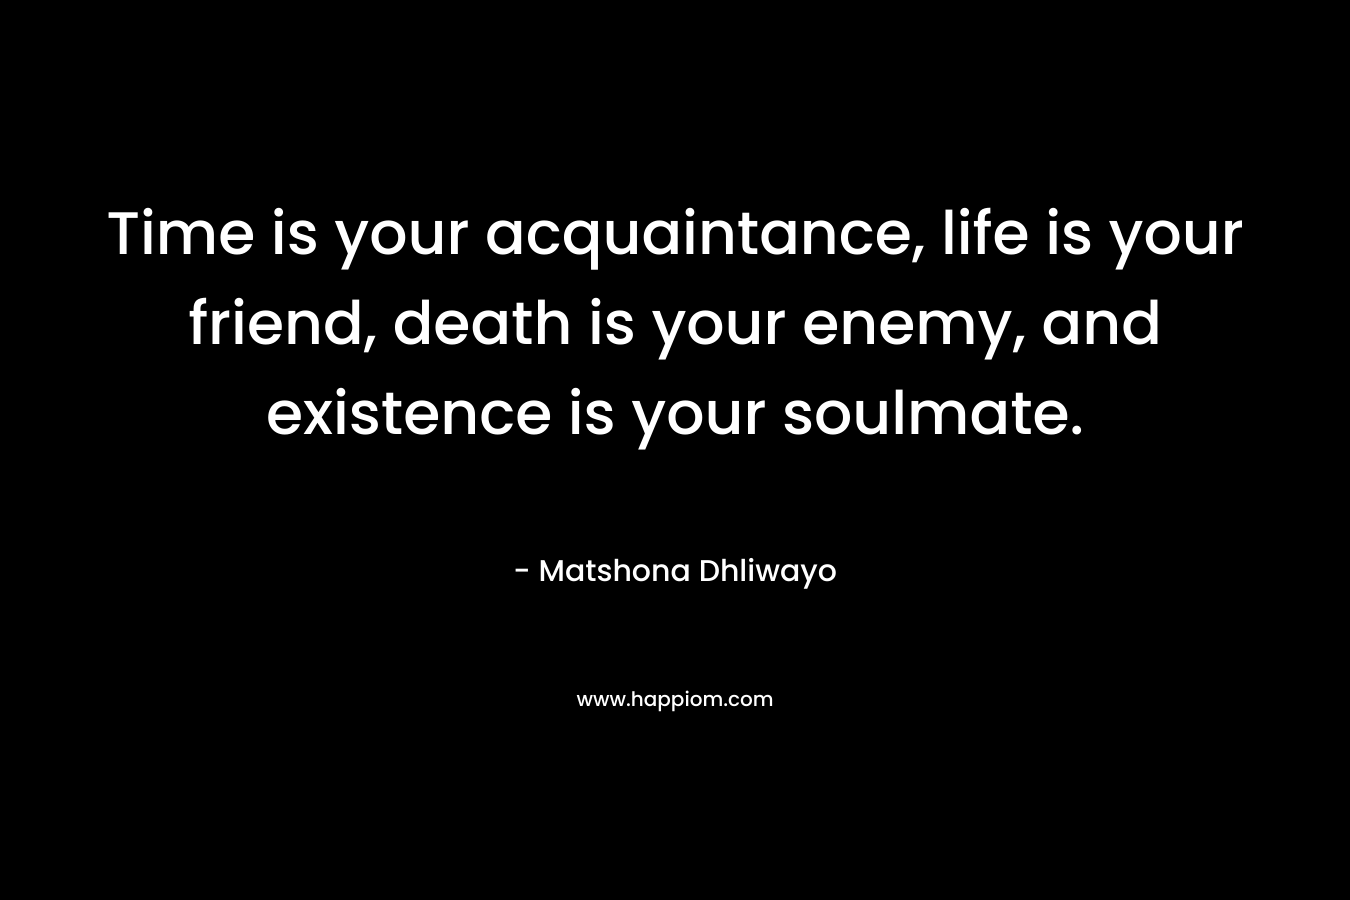 Time is your acquaintance, life is your friend, death is your enemy, and existence is your soulmate.